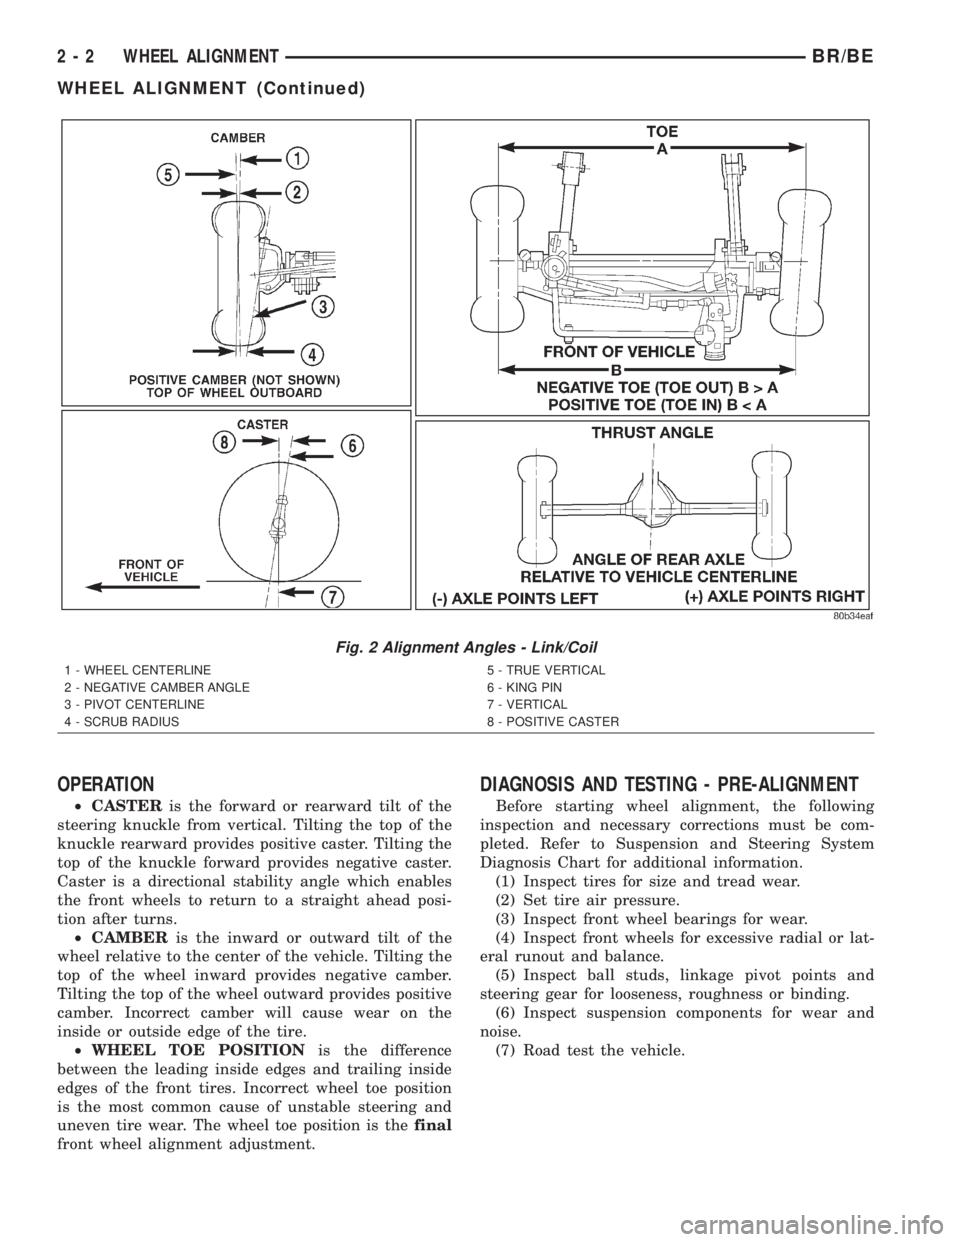 DODGE RAM 2002  Service Repair Manual OPERATION
²CASTERis the forward or rearward tilt of the
steering knuckle from vertical. Tilting the top of the
knuckle rearward provides positive caster. Tilting the
top of the knuckle forward provid